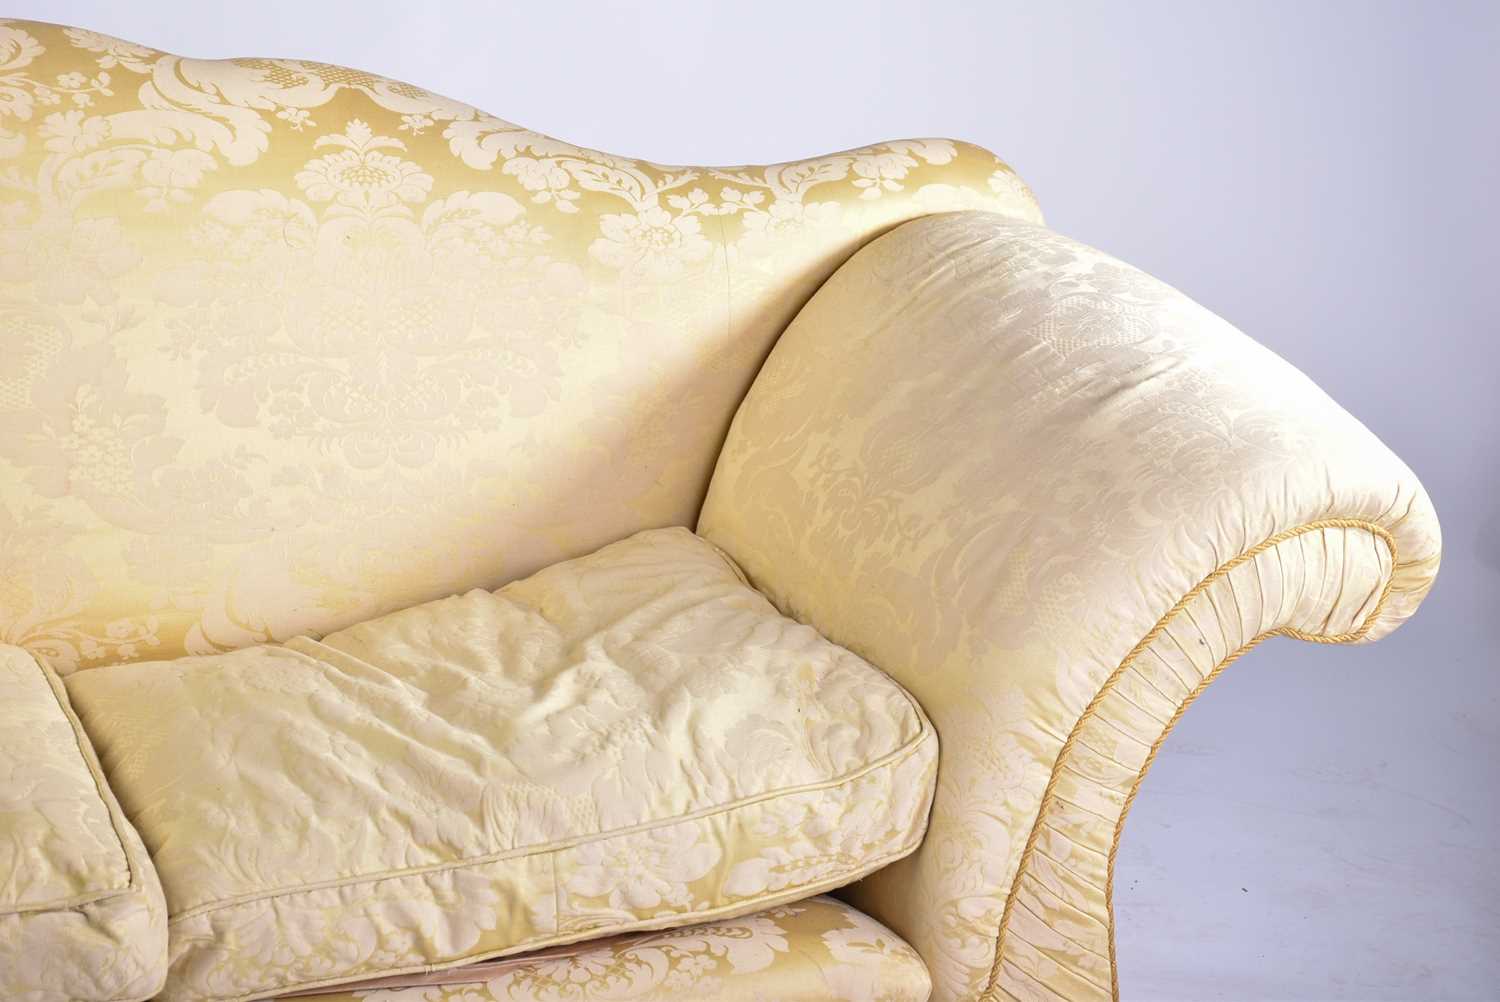 A pair of Harrods camel back two-seat sofas with stuff over pale gold Damask upholstery with - Image 4 of 12